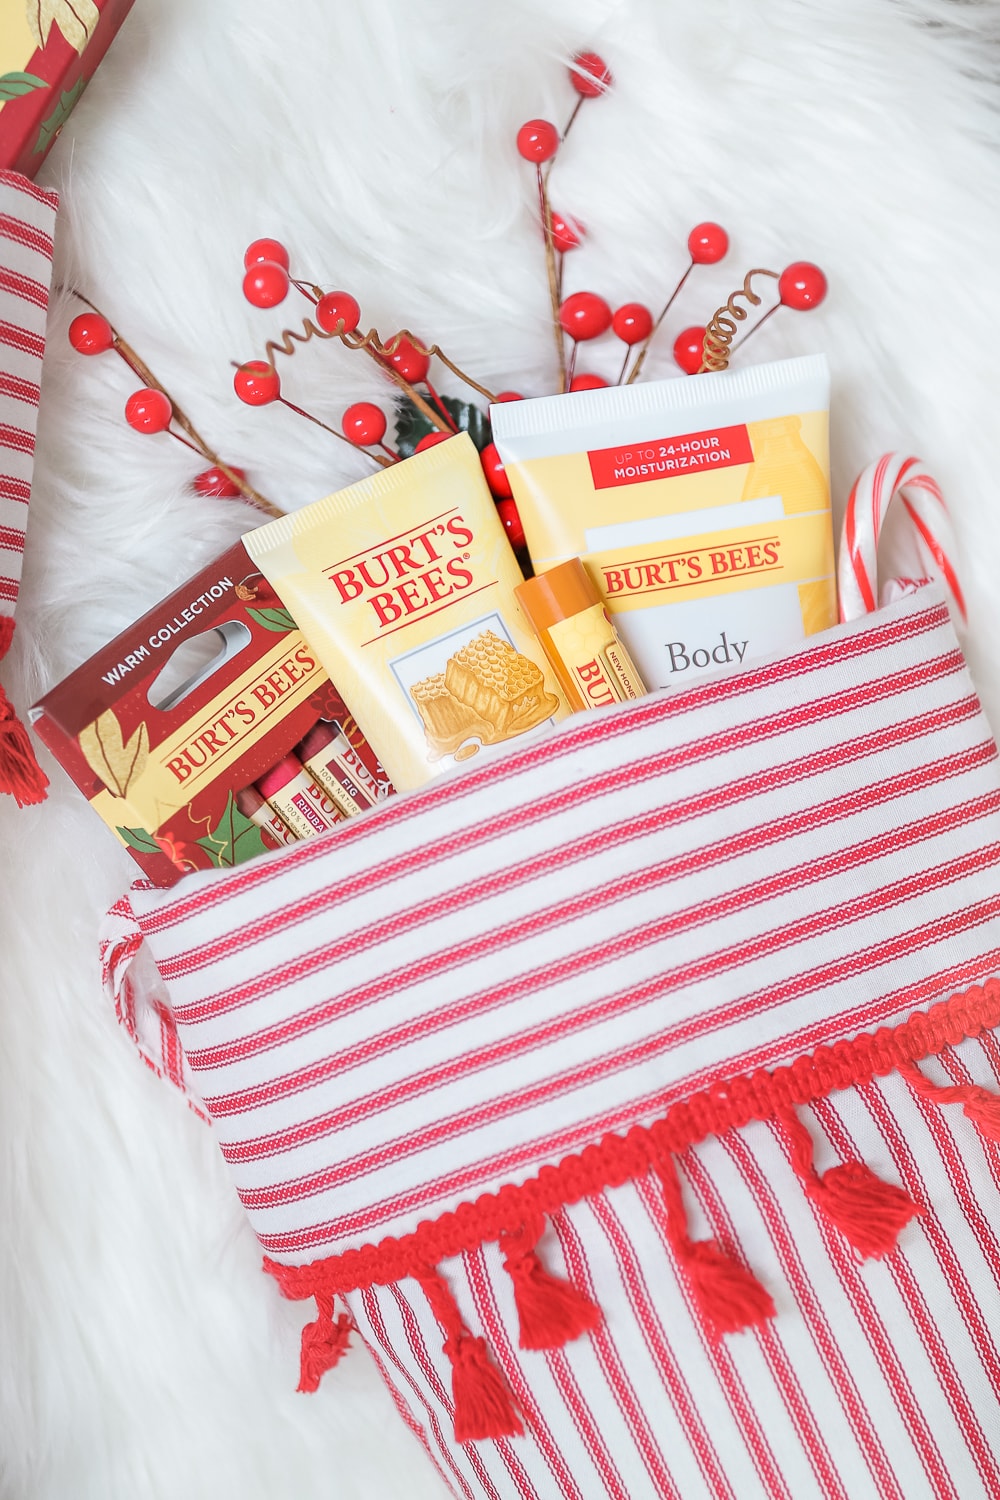 Best Burt's Bees gift sets under 15 rounded up by blogger Stephanie Ziajka on Diary of a Debutante